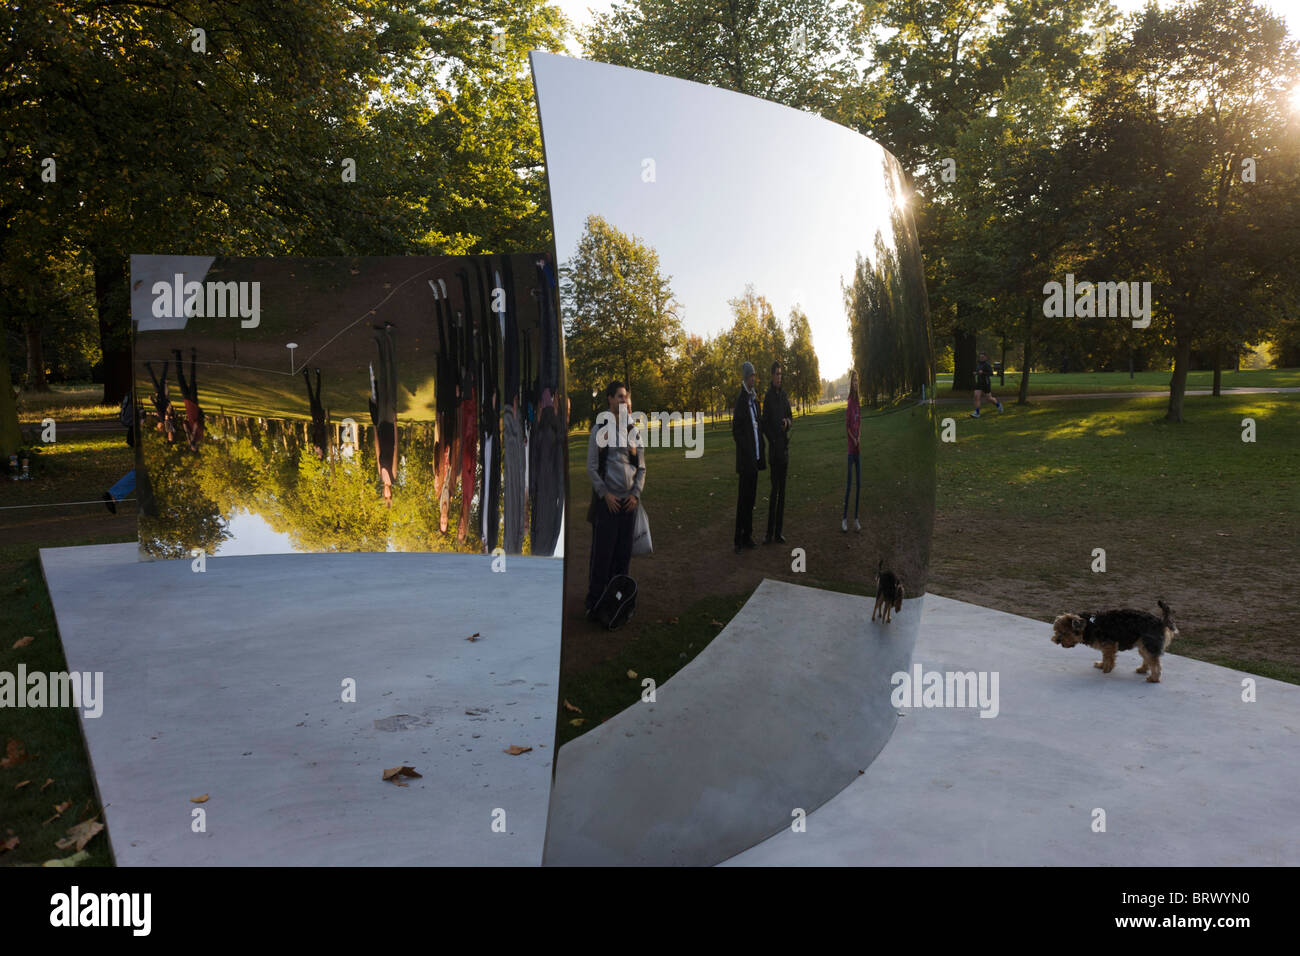 Artist Anish Kapoor's artwork called the C-Curve, part of his Turning the World Upside Down show at the Serpentine Gallery. Stock Photo